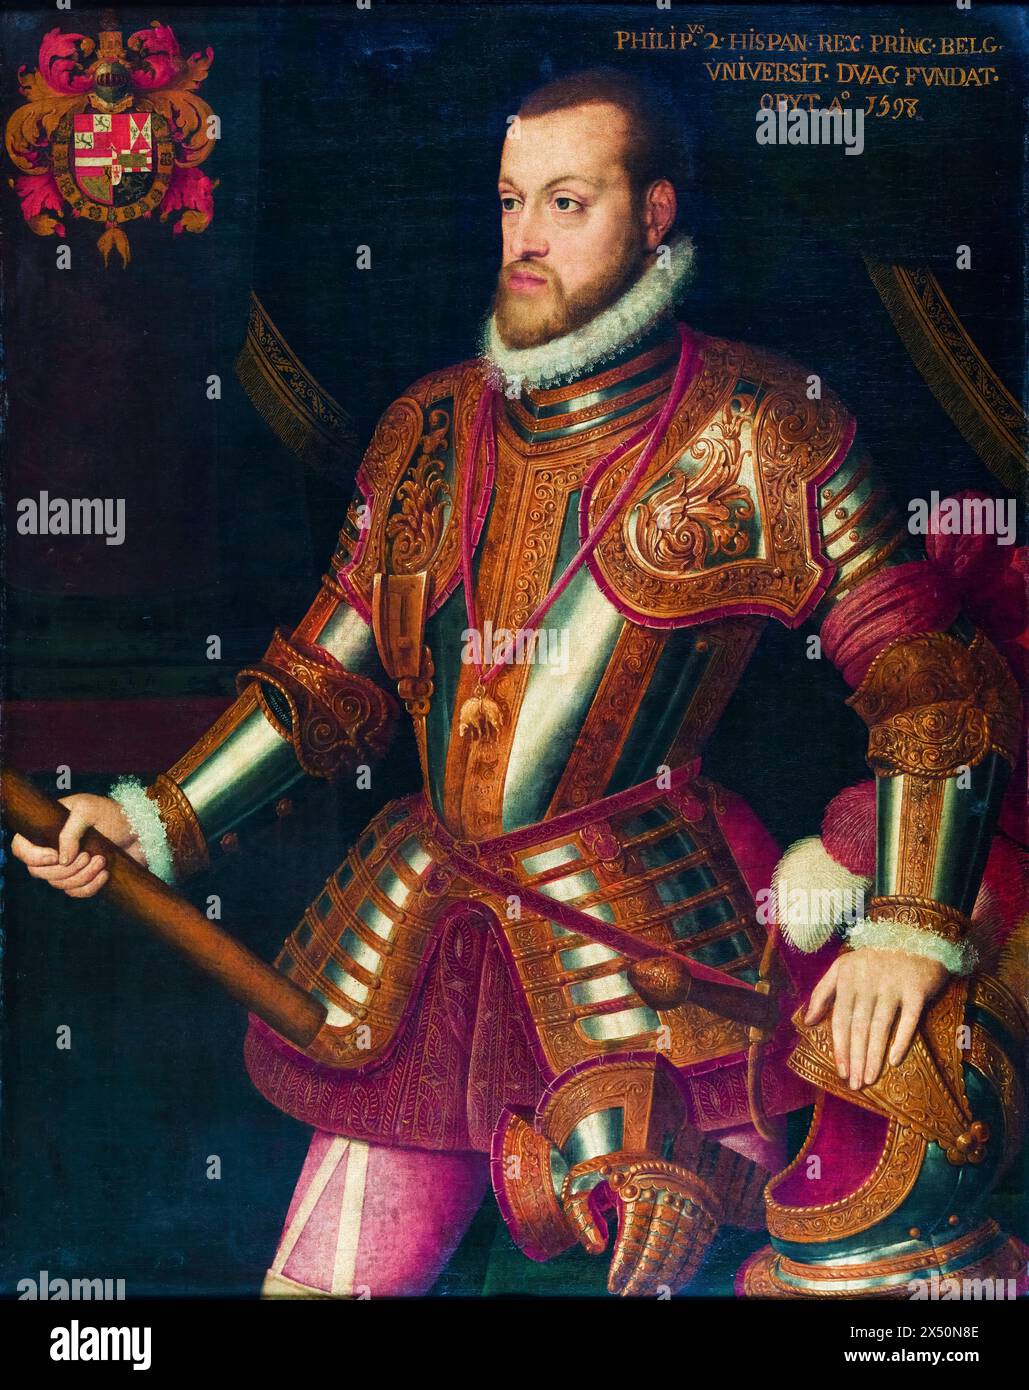 Philip II (1527-1598), King of Spain, portrait painting in oil on canvas, 1550-1575 Stock Photo